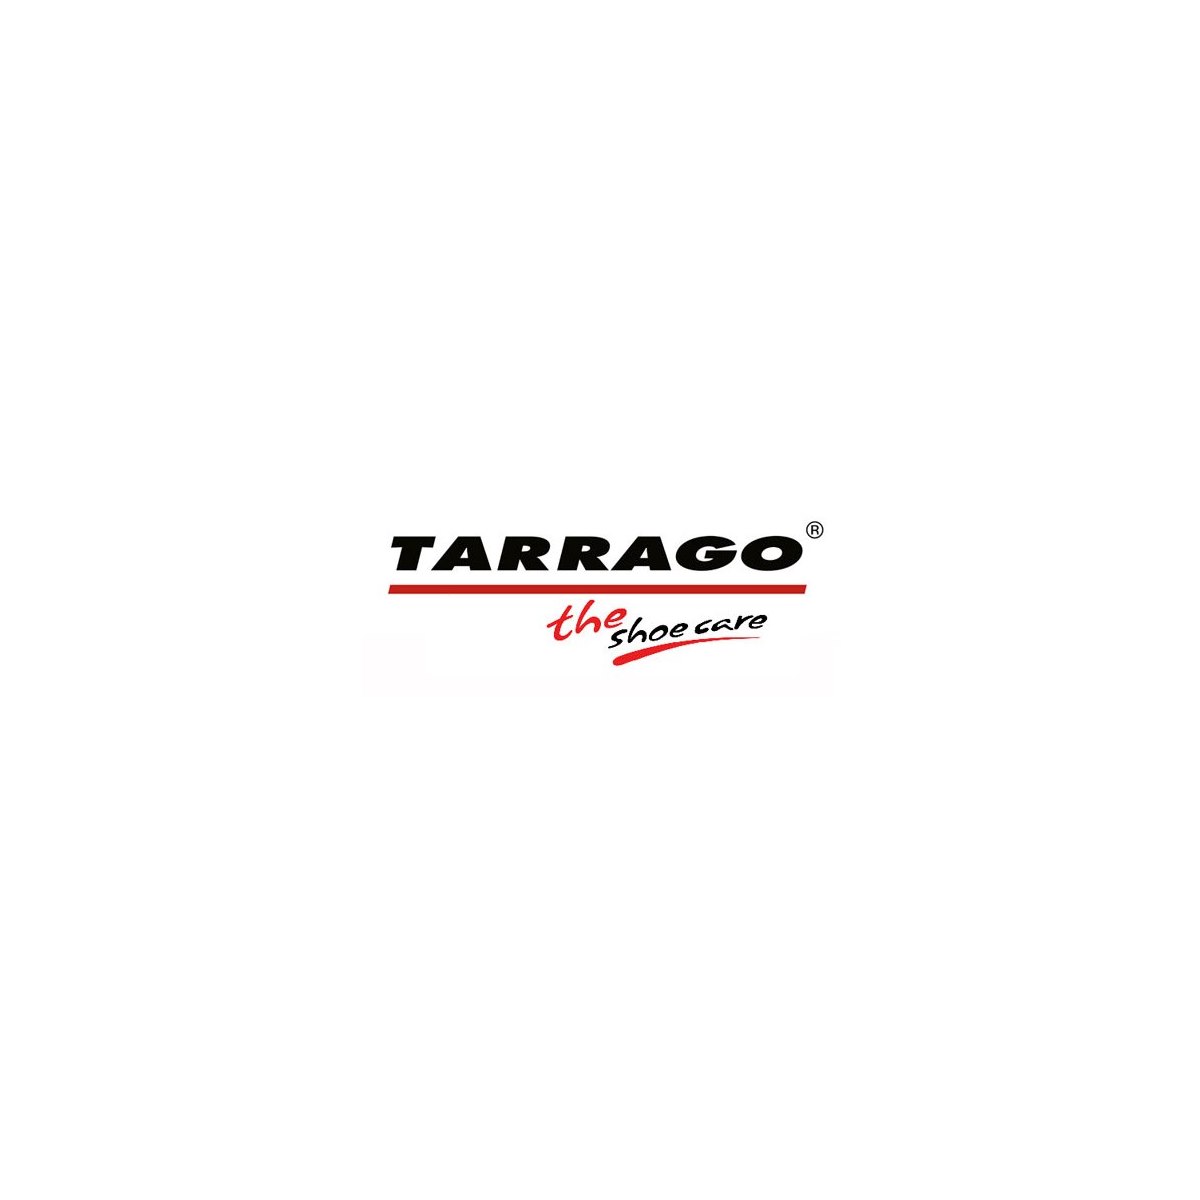 Where to Buy Tarrago Shoe Care Products